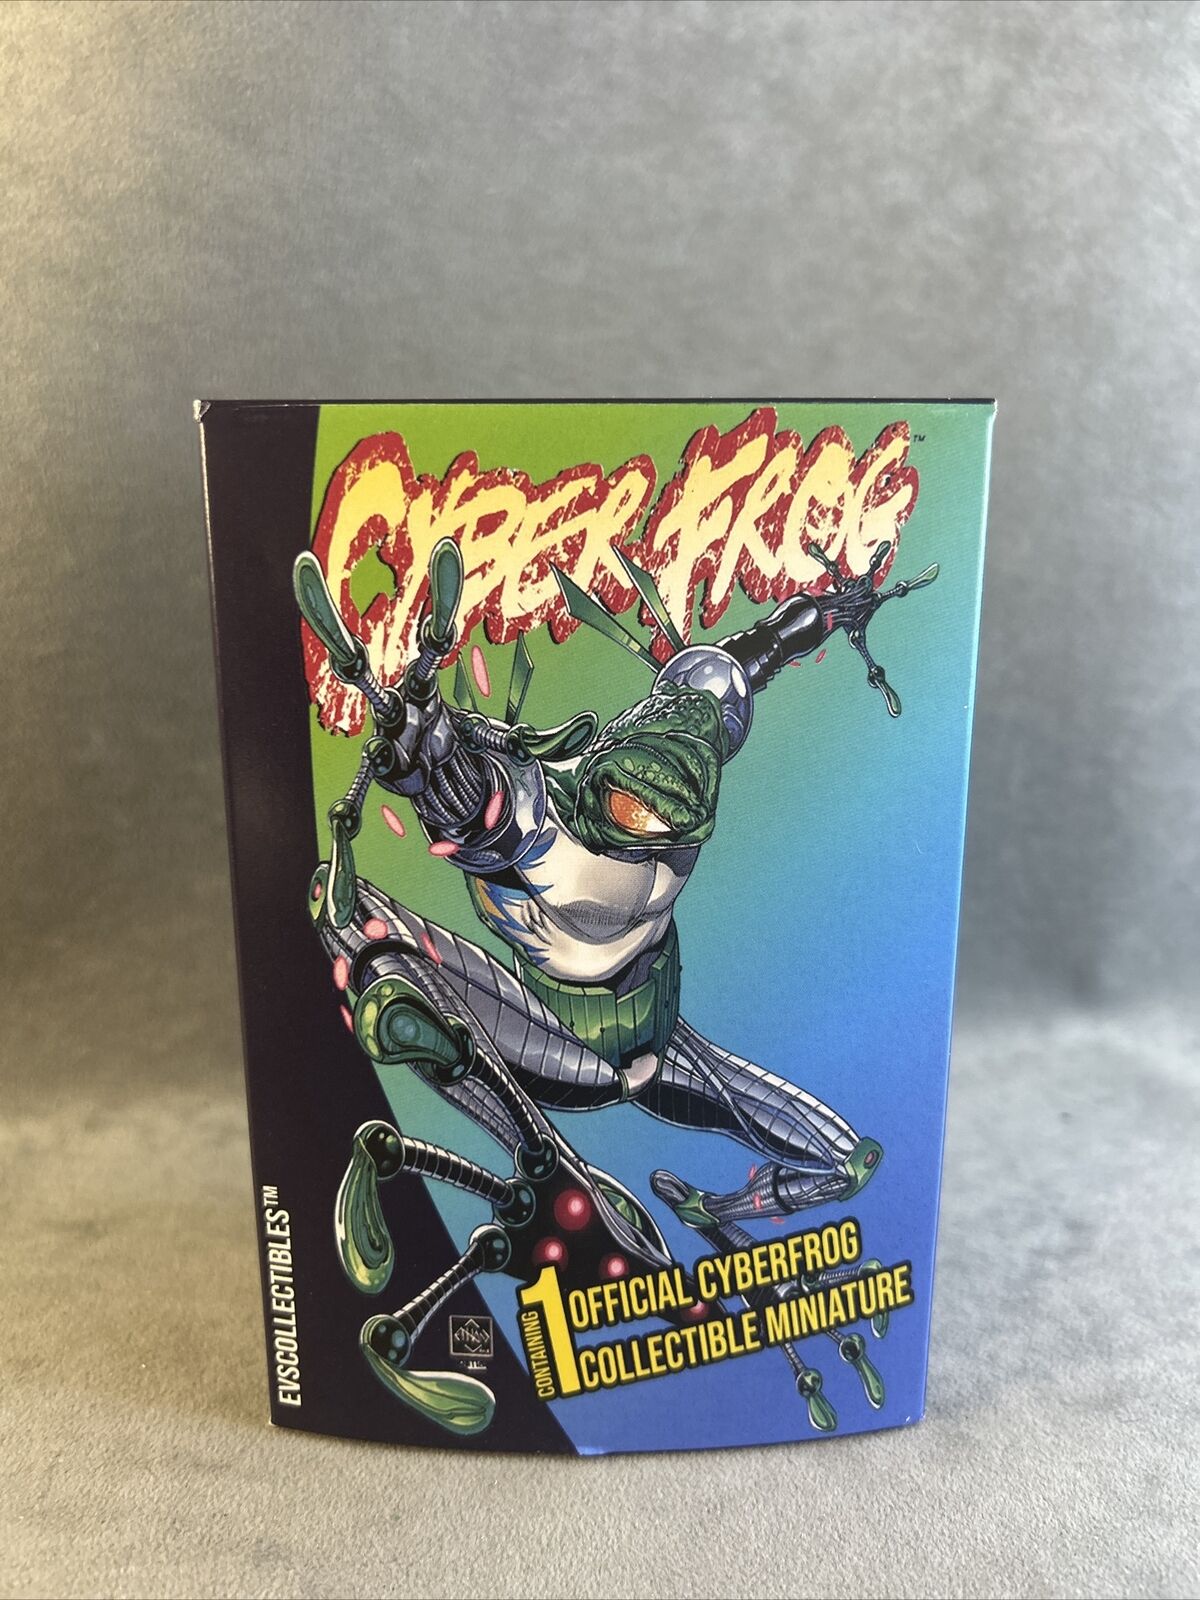 CYBERFROG *RARE* Resin Figurine Official Collectible